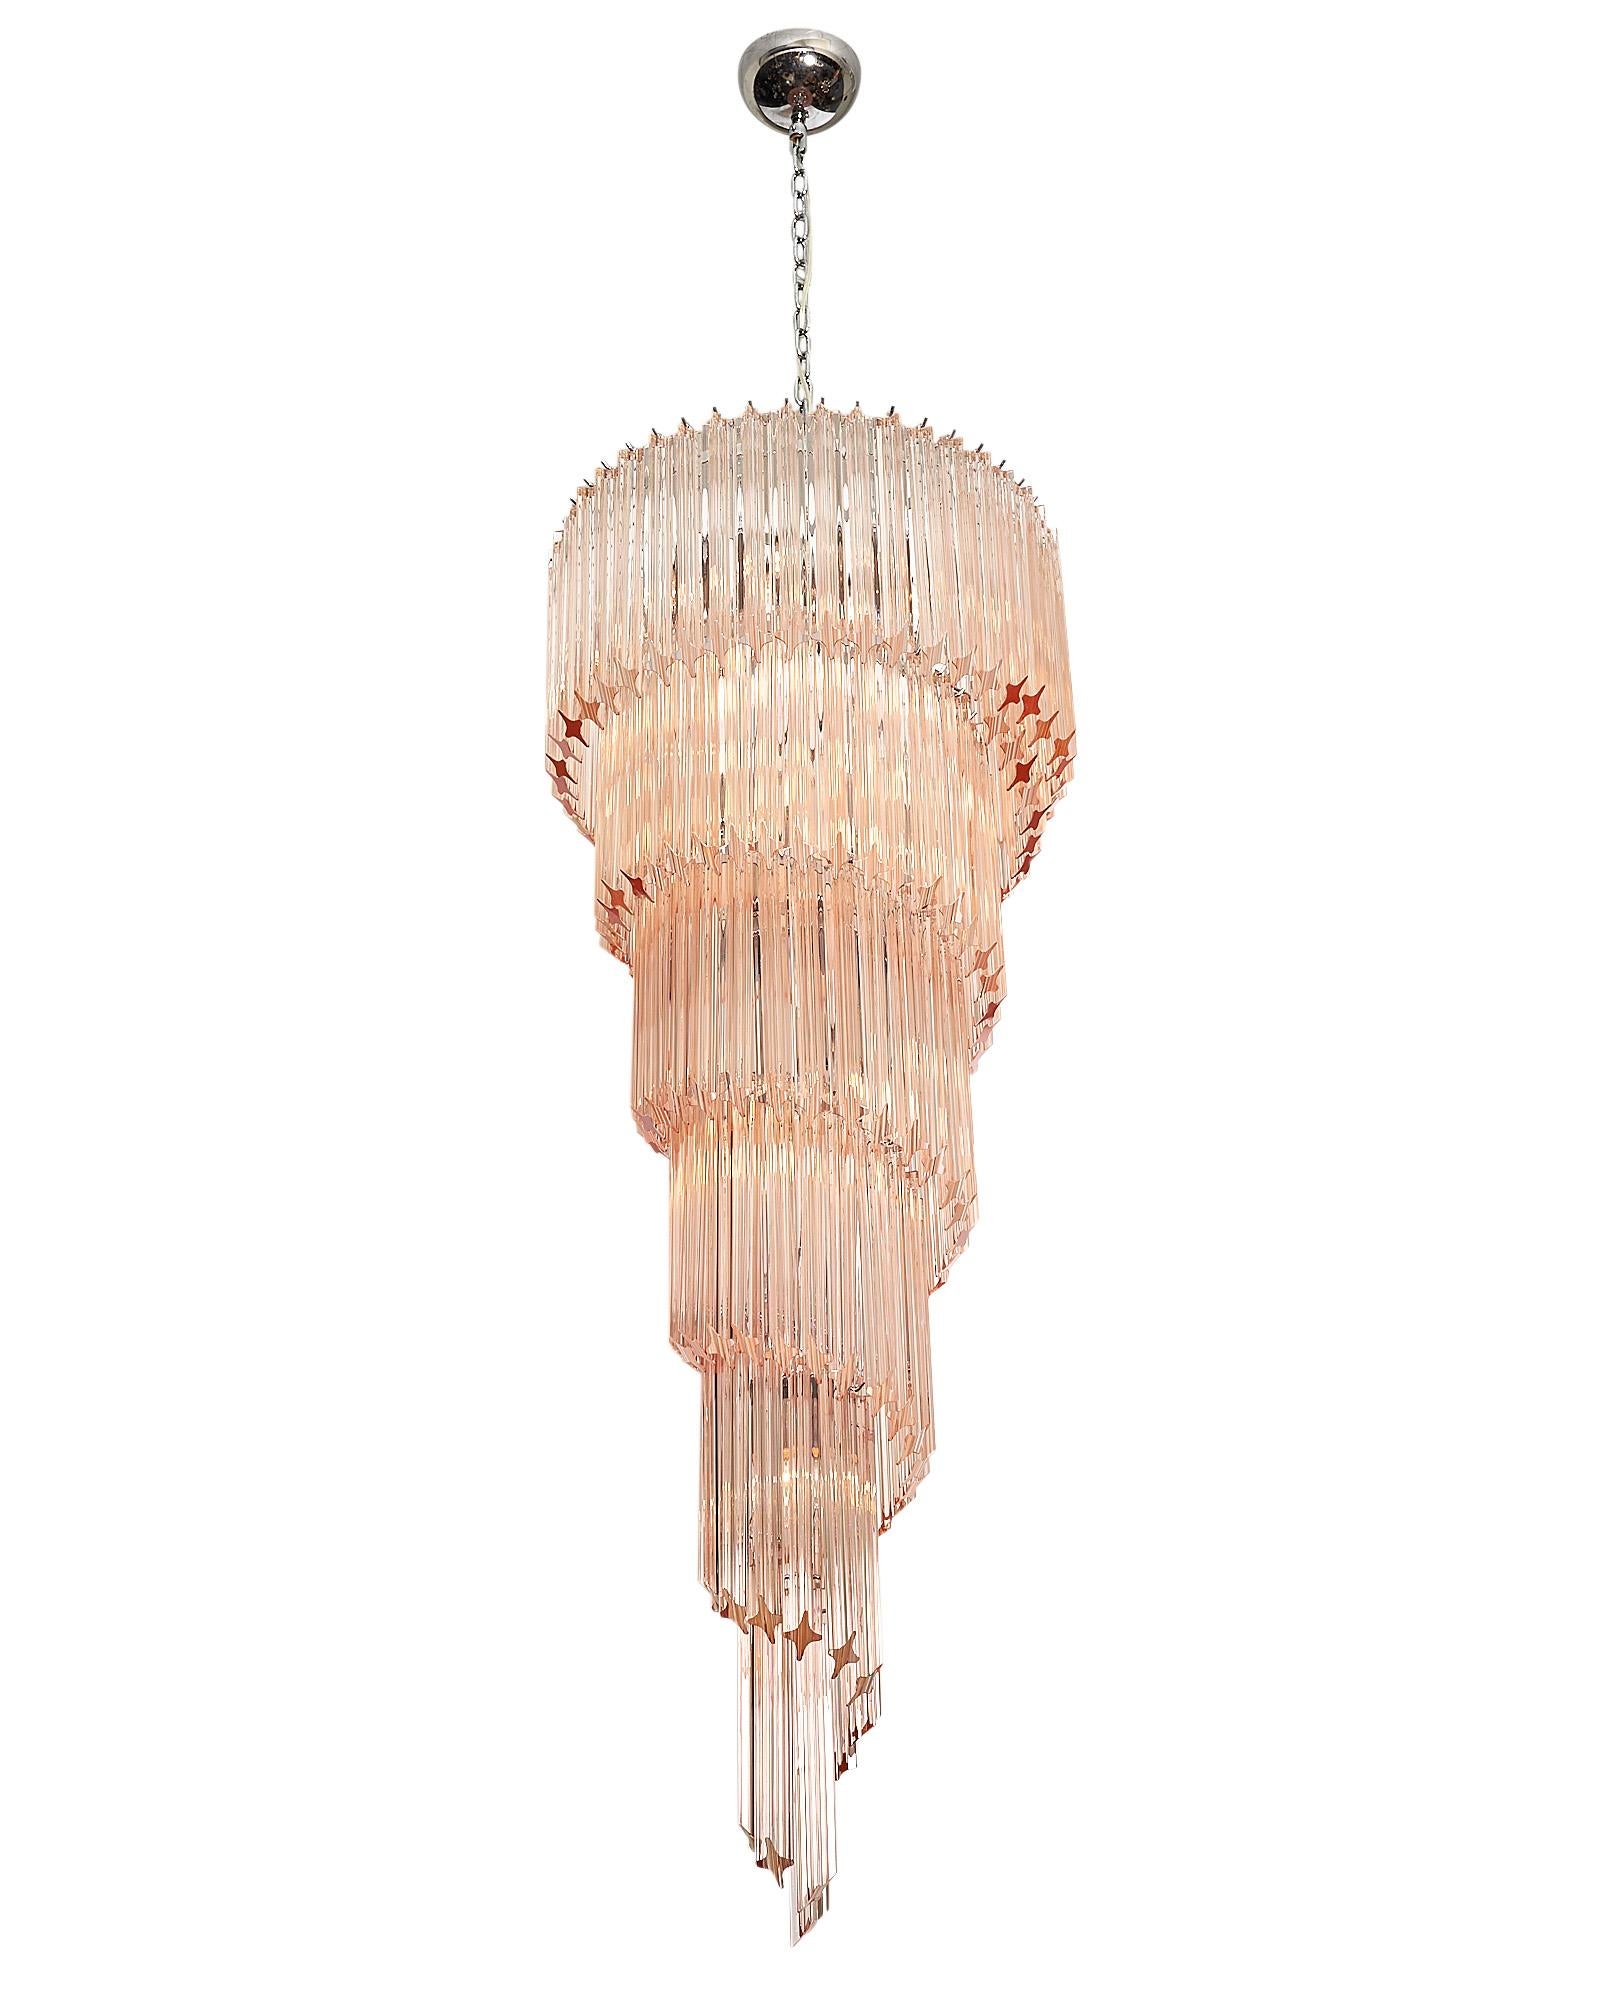 Pink Murano glass Venini “triedri” spiral chandelier. This piece by Venini is in the iconic “spirale triedri” shape and features beautiful hand-blown glass components in a pink hue. They glass is layered in a downward spiral on a chromed structure.